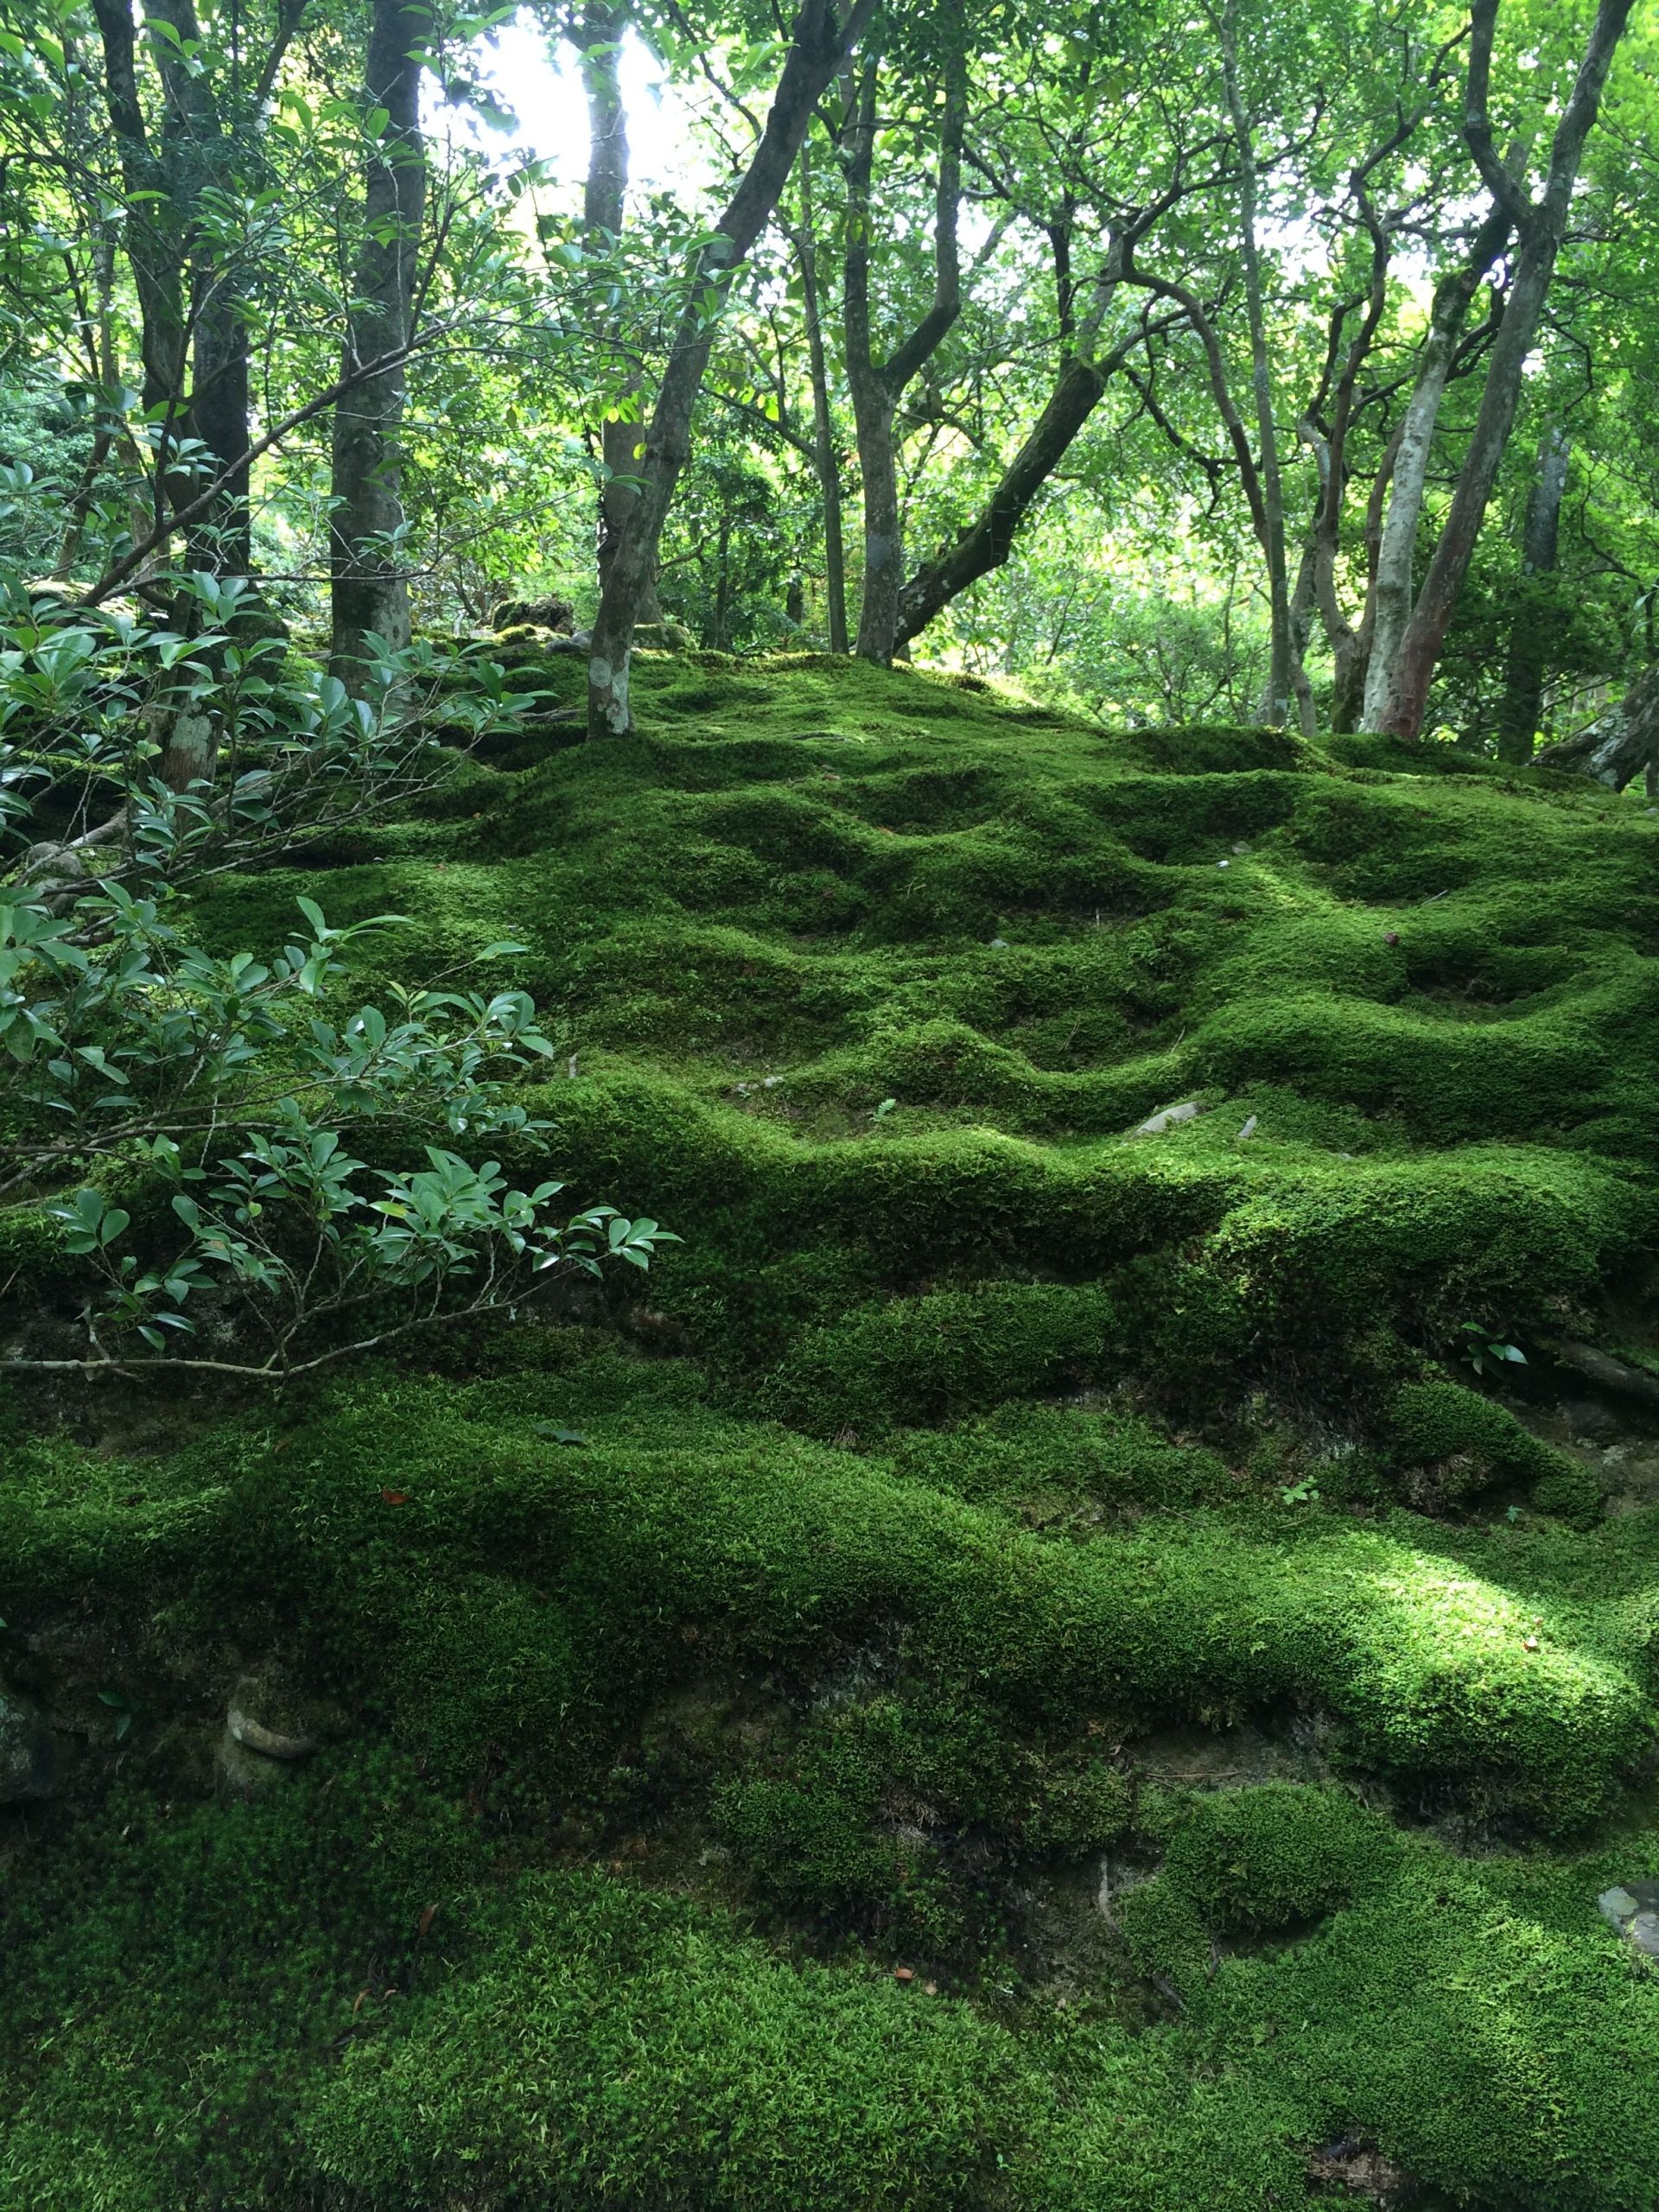 Visiting Koke no Mori – The Moss Forest in Japan